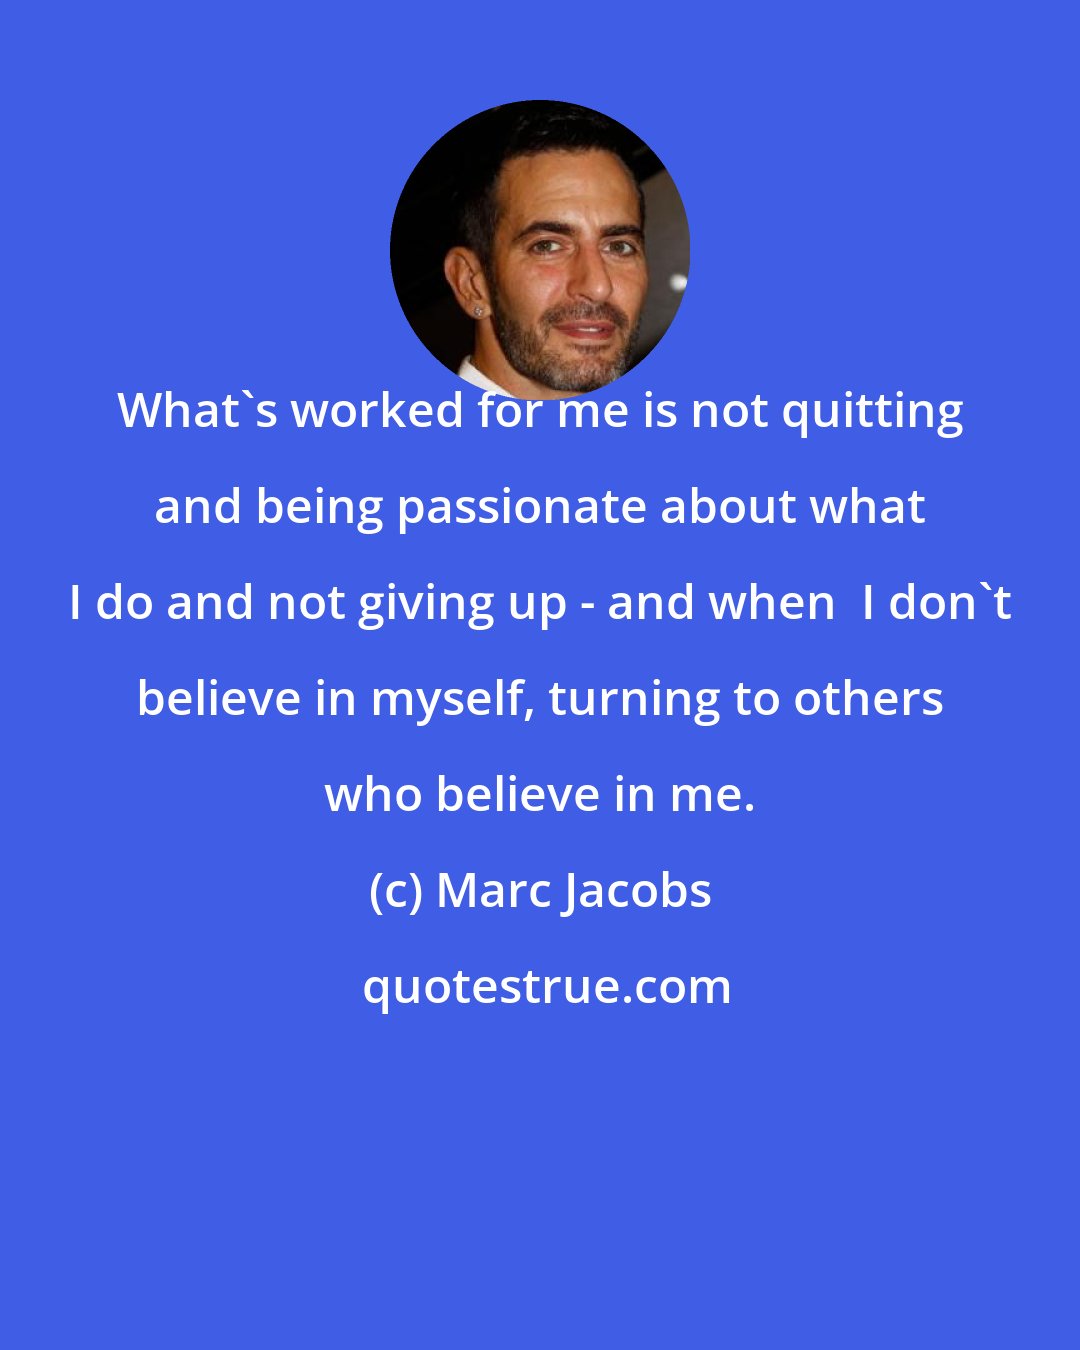 Marc Jacobs: What's worked for me is not quitting and being passionate about what I do and not giving up - and when  I don't believe in myself, turning to others who believe in me.